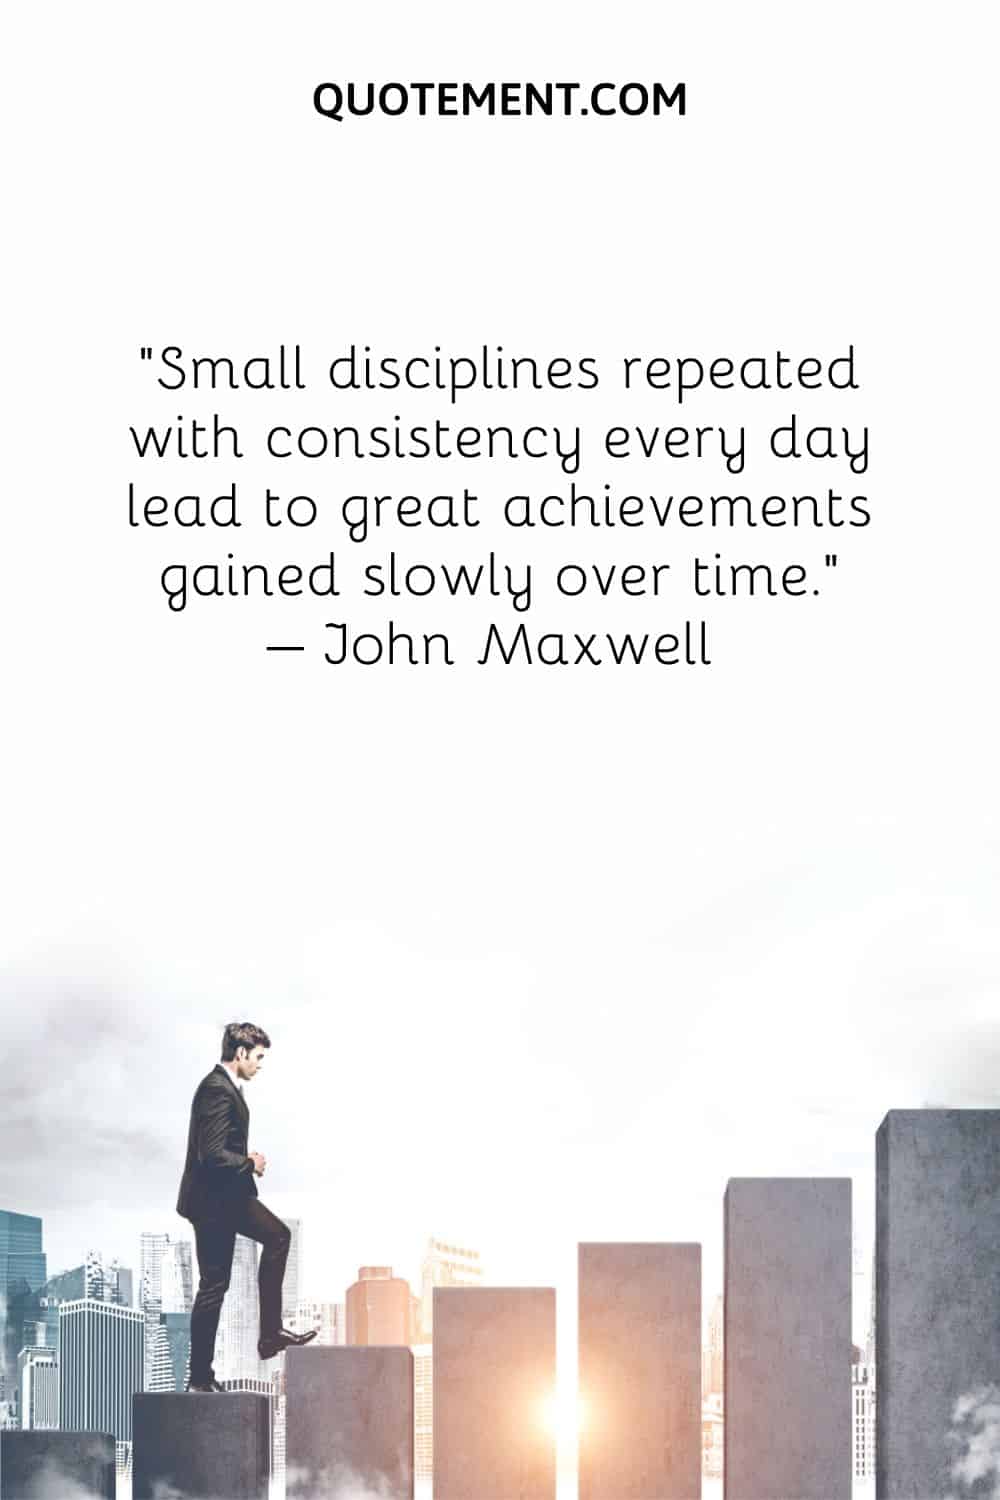 Small disciplines repeated with consistency every day lead to great achievements gained slowly over time